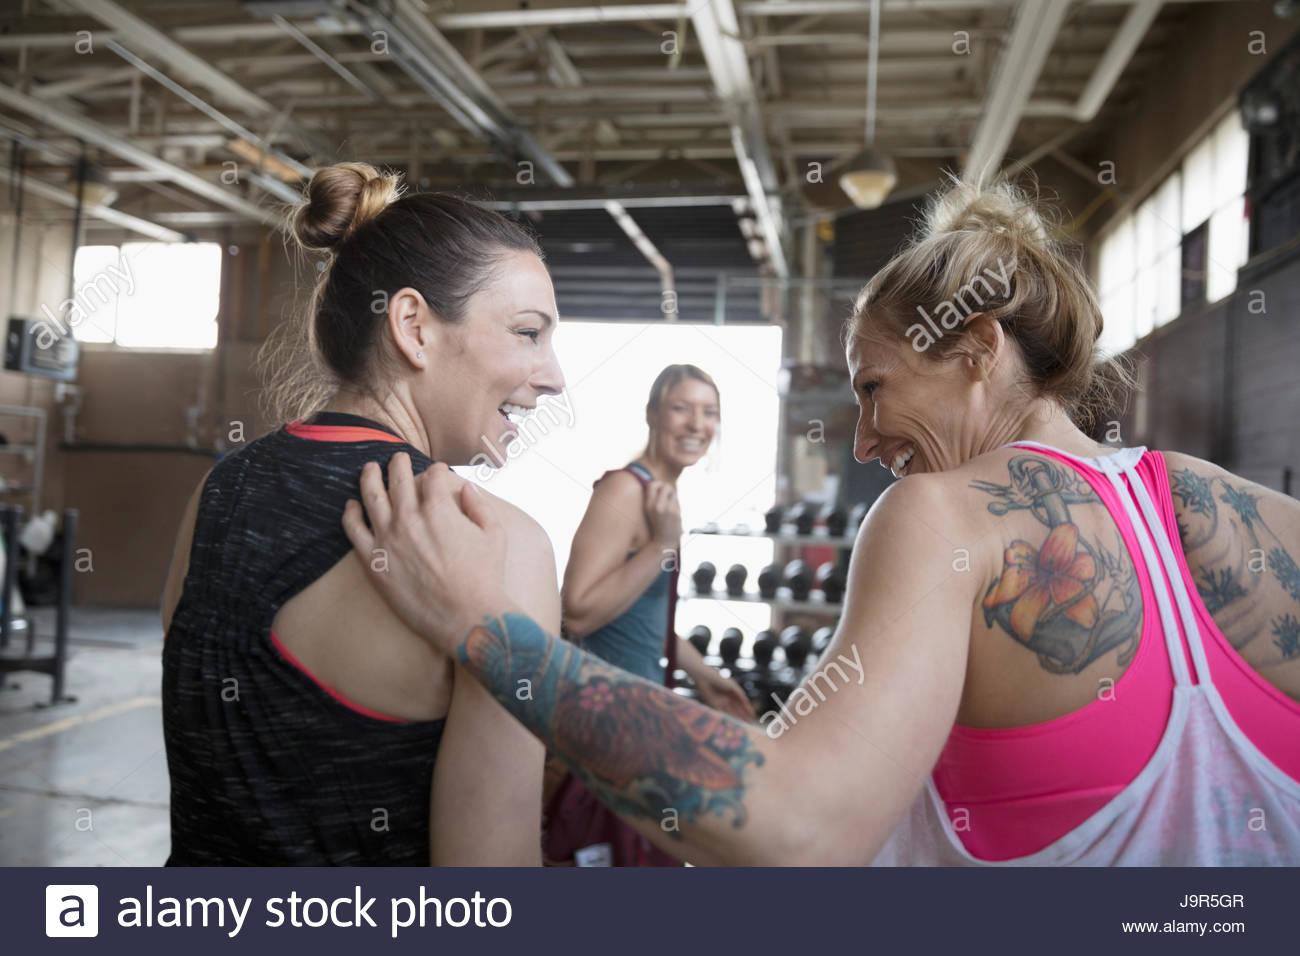 Strong, tattooed women smiling in gym Stock Photo